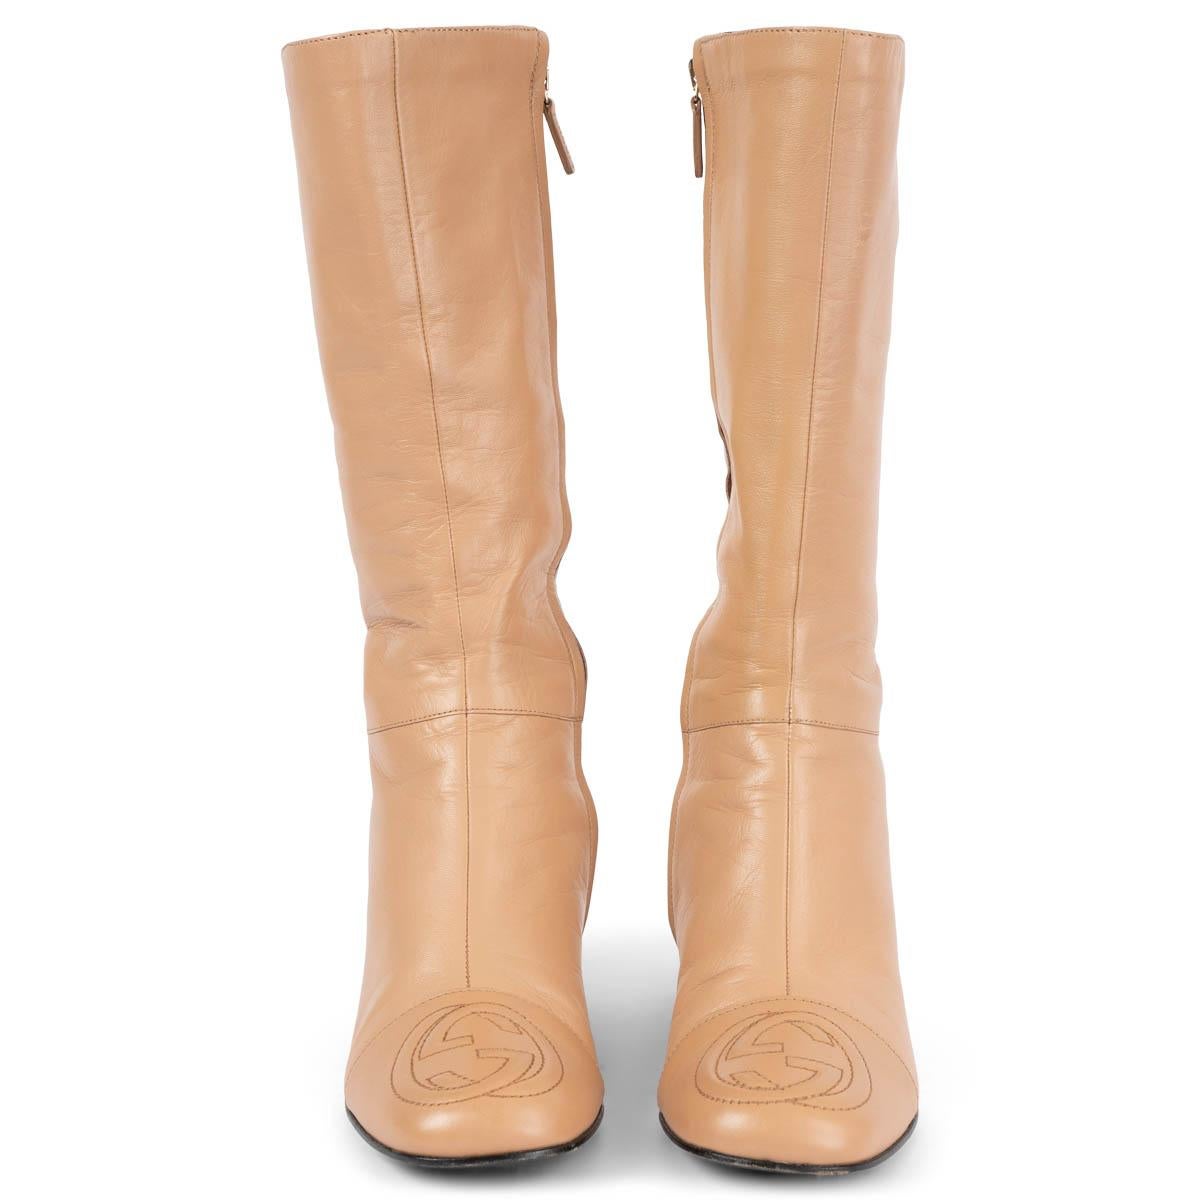 100% authentic Gucci block-heel mid-calf boots in tan smooth leather. The design features a stitched GG logo in the cap toe and open with a zipper on the inside. Have been worn and are in excellent condition. 

Measurements
Imprinted Size	37
Shoe